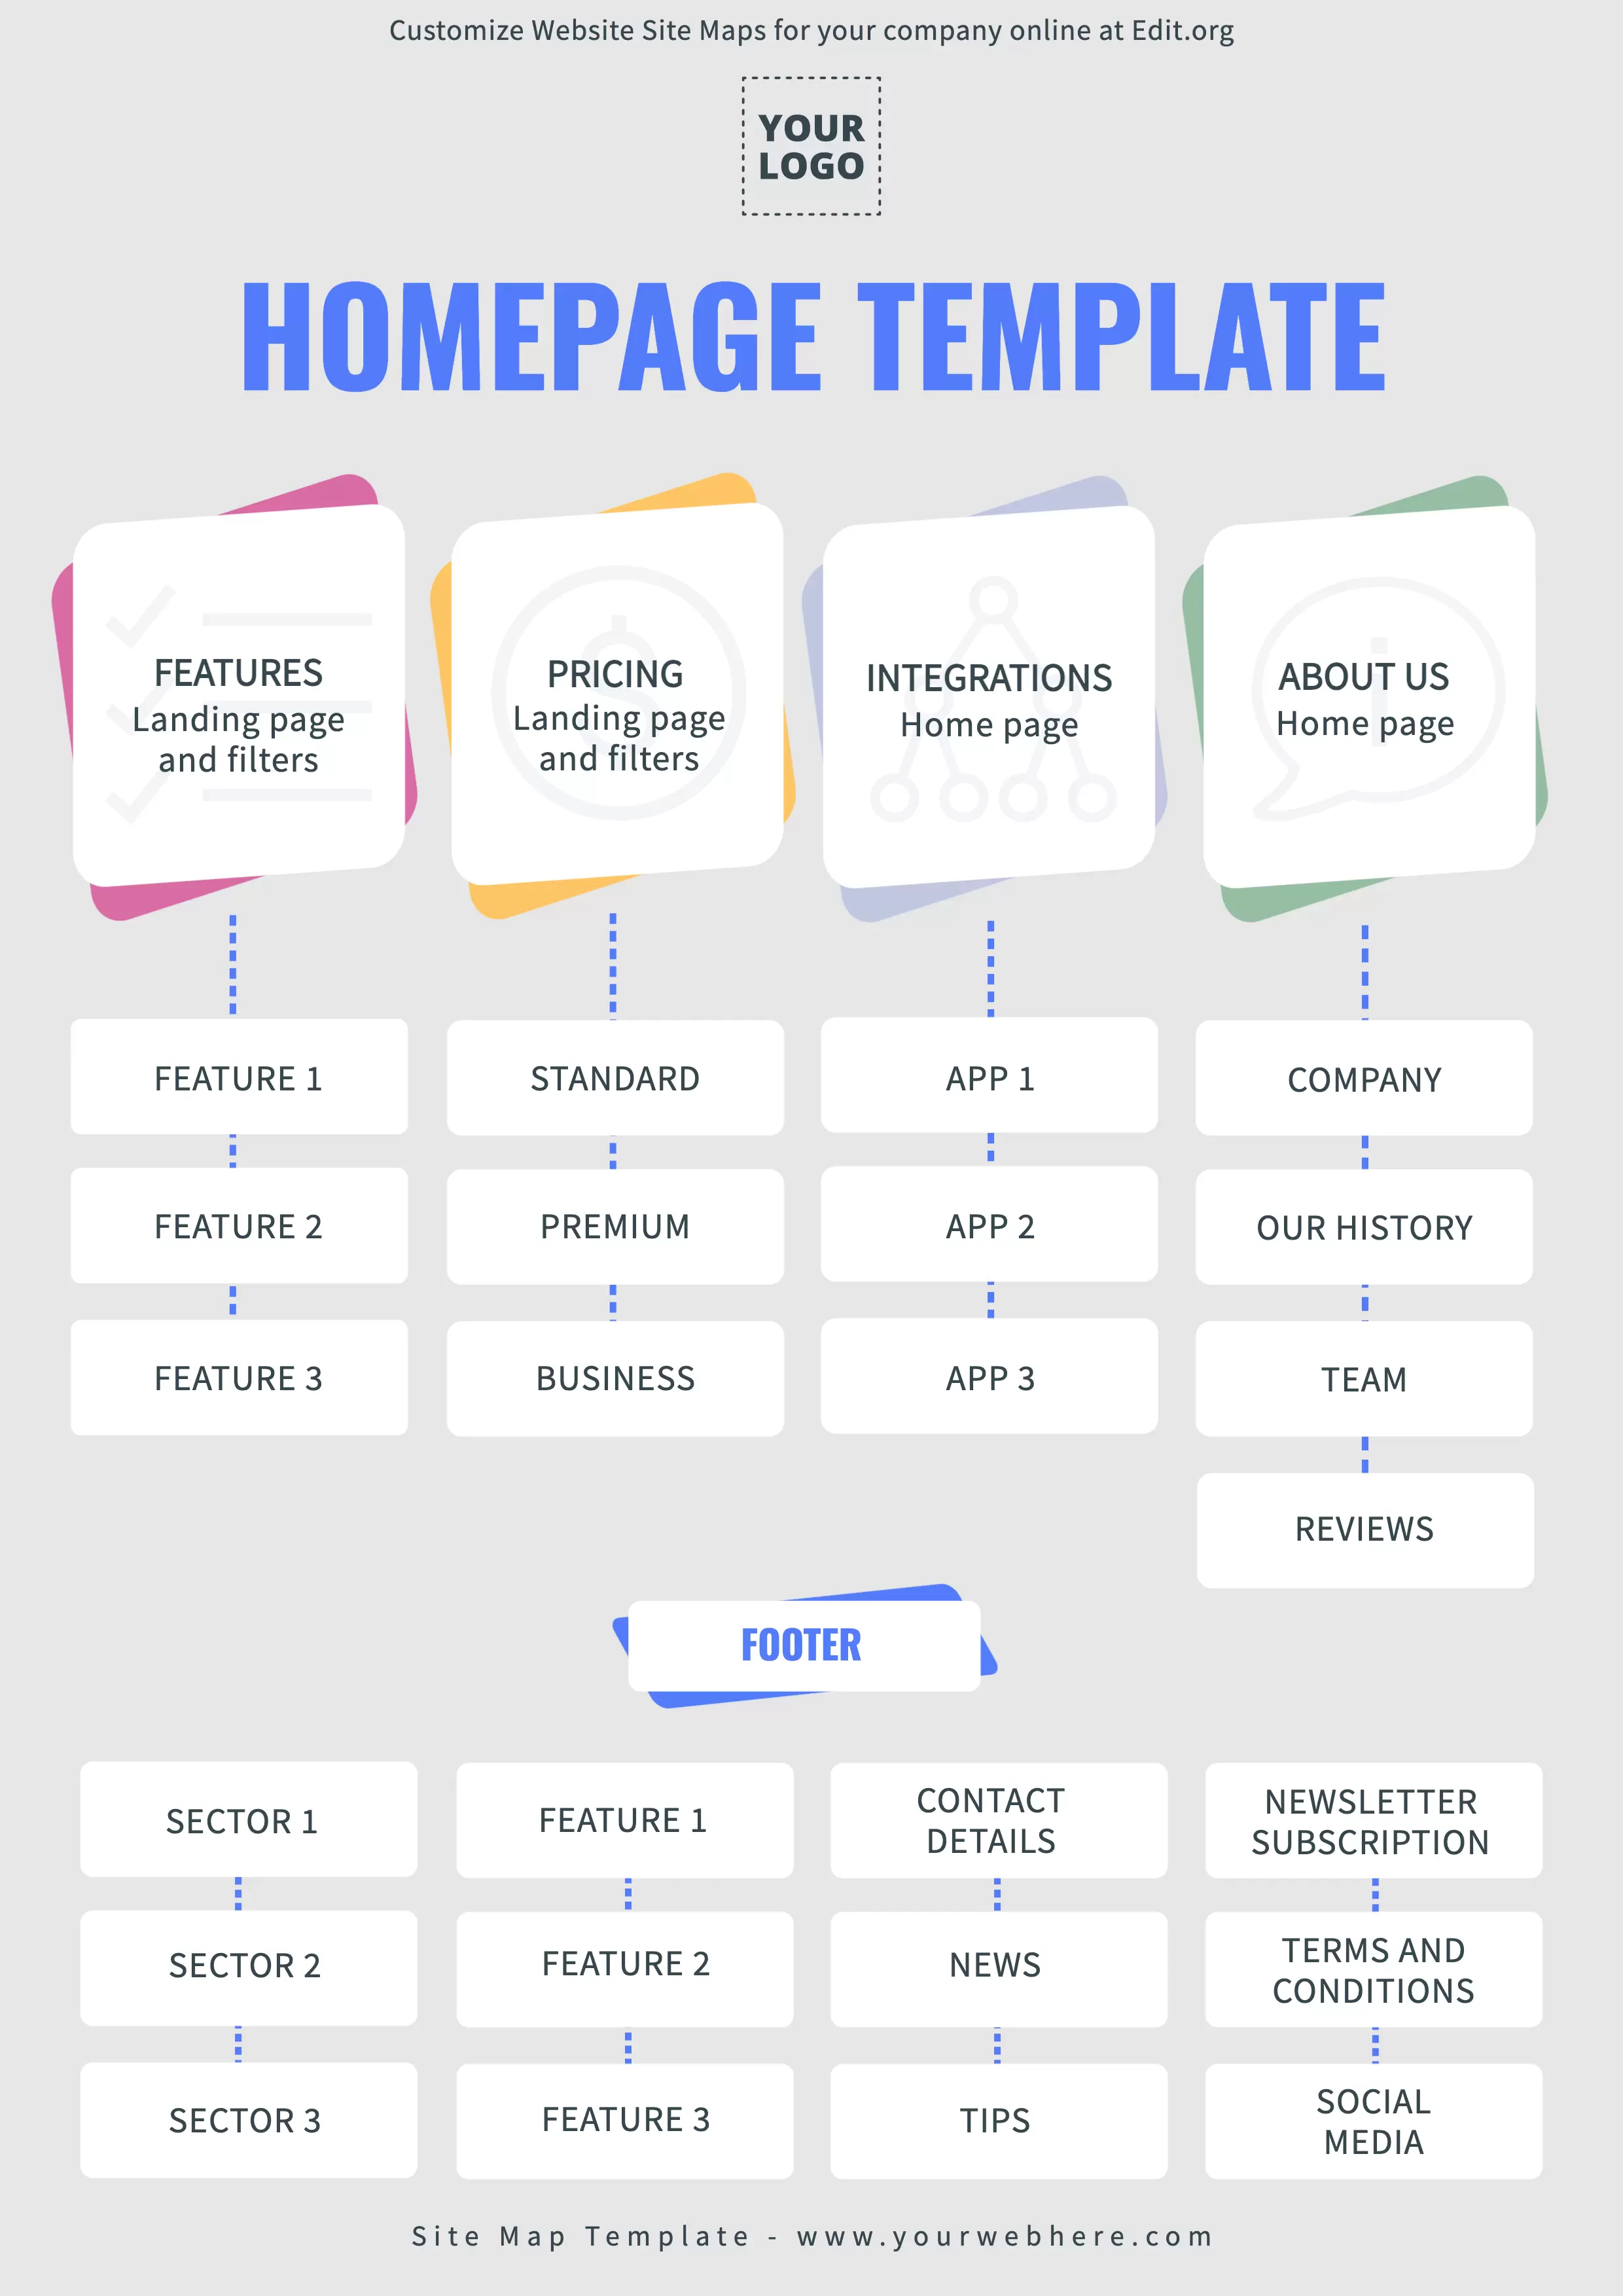 Free editable Site Map example template